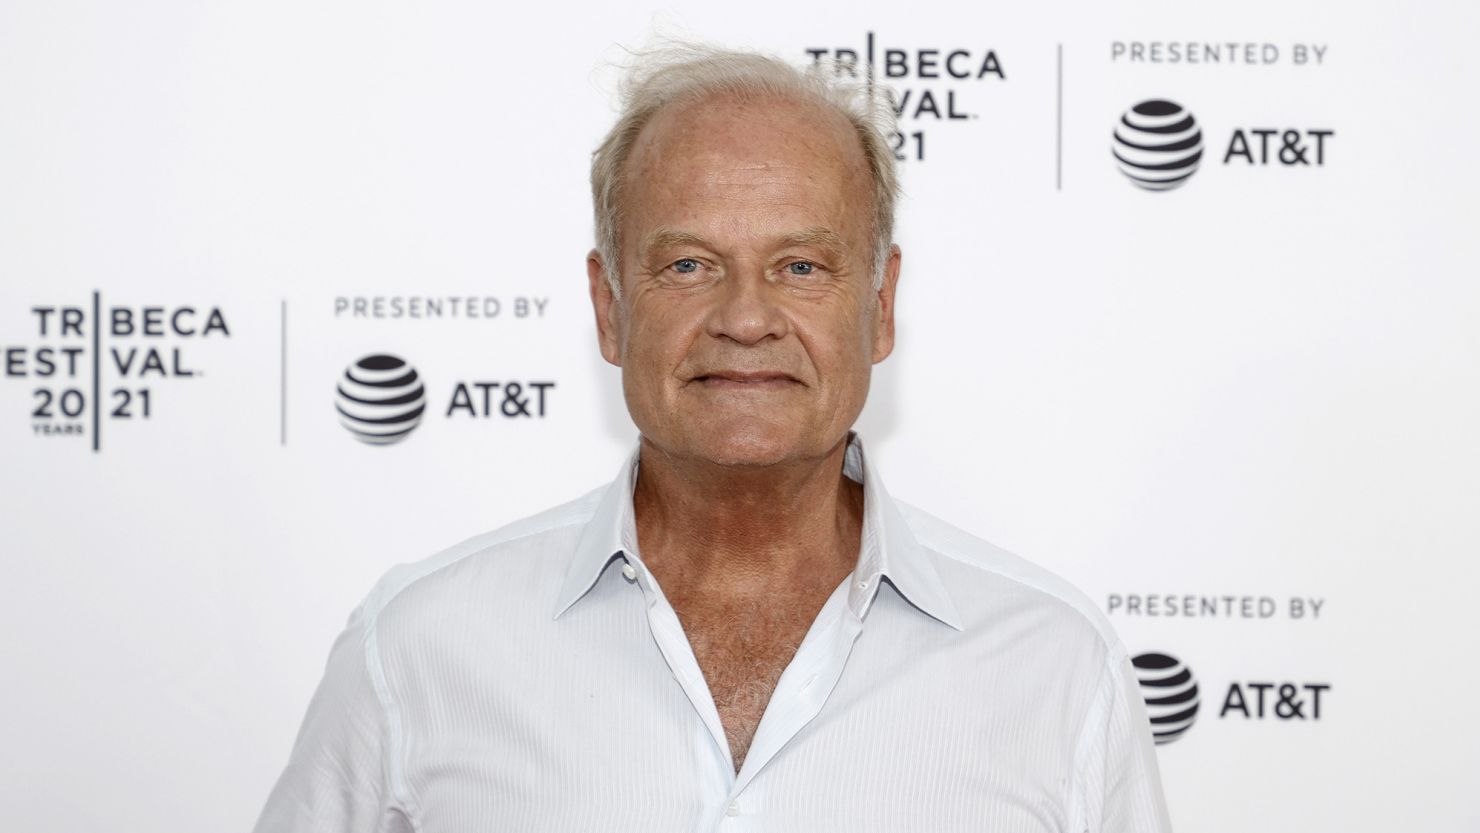 NEW YORK, NEW YORK - JUNE 20: Kelsey Grammer attends the "The God Committee" premiere during the 2021 Tribeca Festival at Brooklyn Commons at MetroTech on June 20, 2021 in New York City. (Photo by Jamie McCarthy/Getty Images for Tribeca Festival)